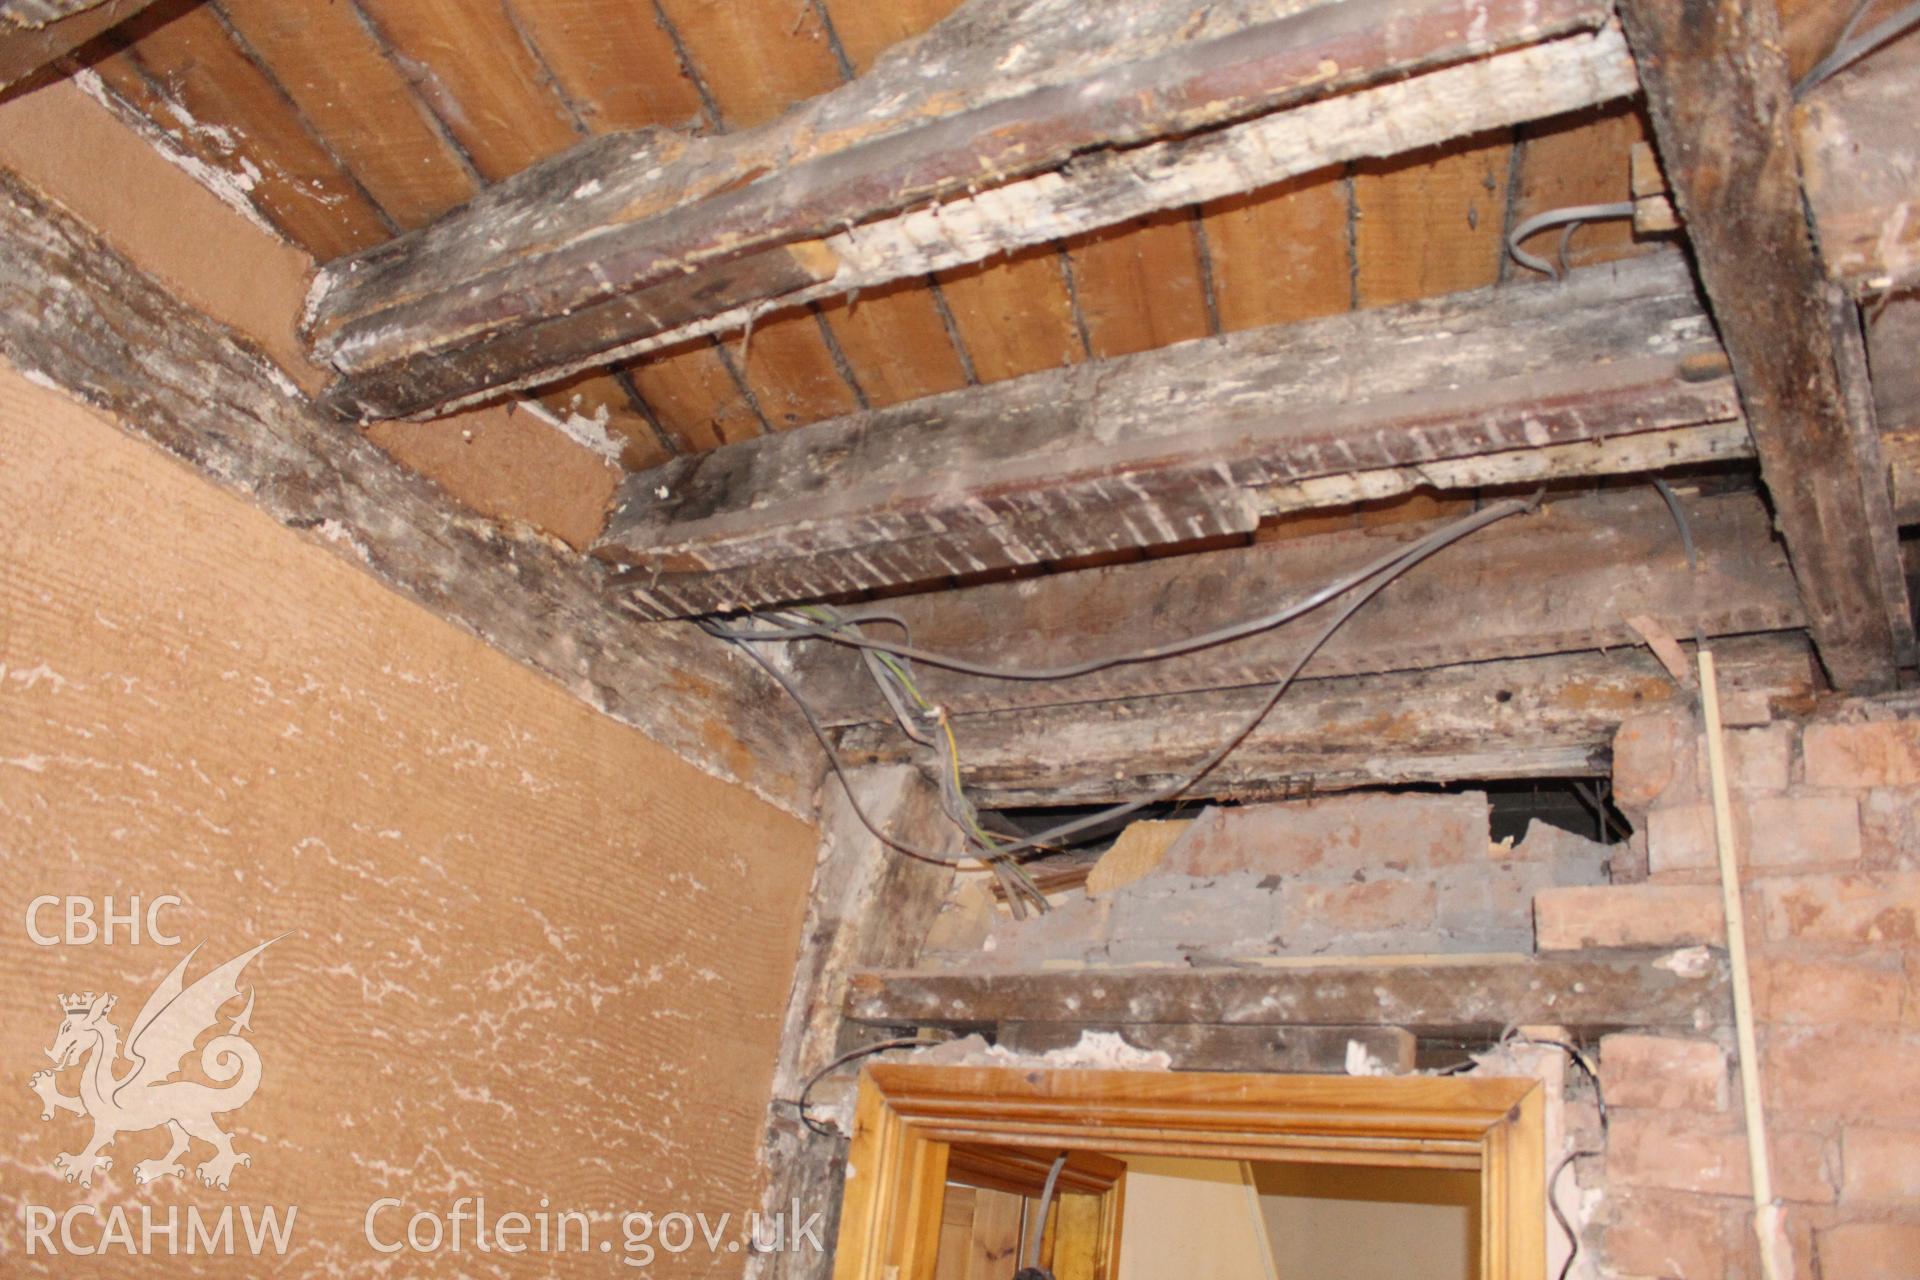 Colour photograph showing interior red brick wall and modern wooden door frame and ceiling beams at Porth y Dwr, Clwyd Street, Ruthin. Photograph taken during survey conducted by Geoff Ward on 9th October 2014.